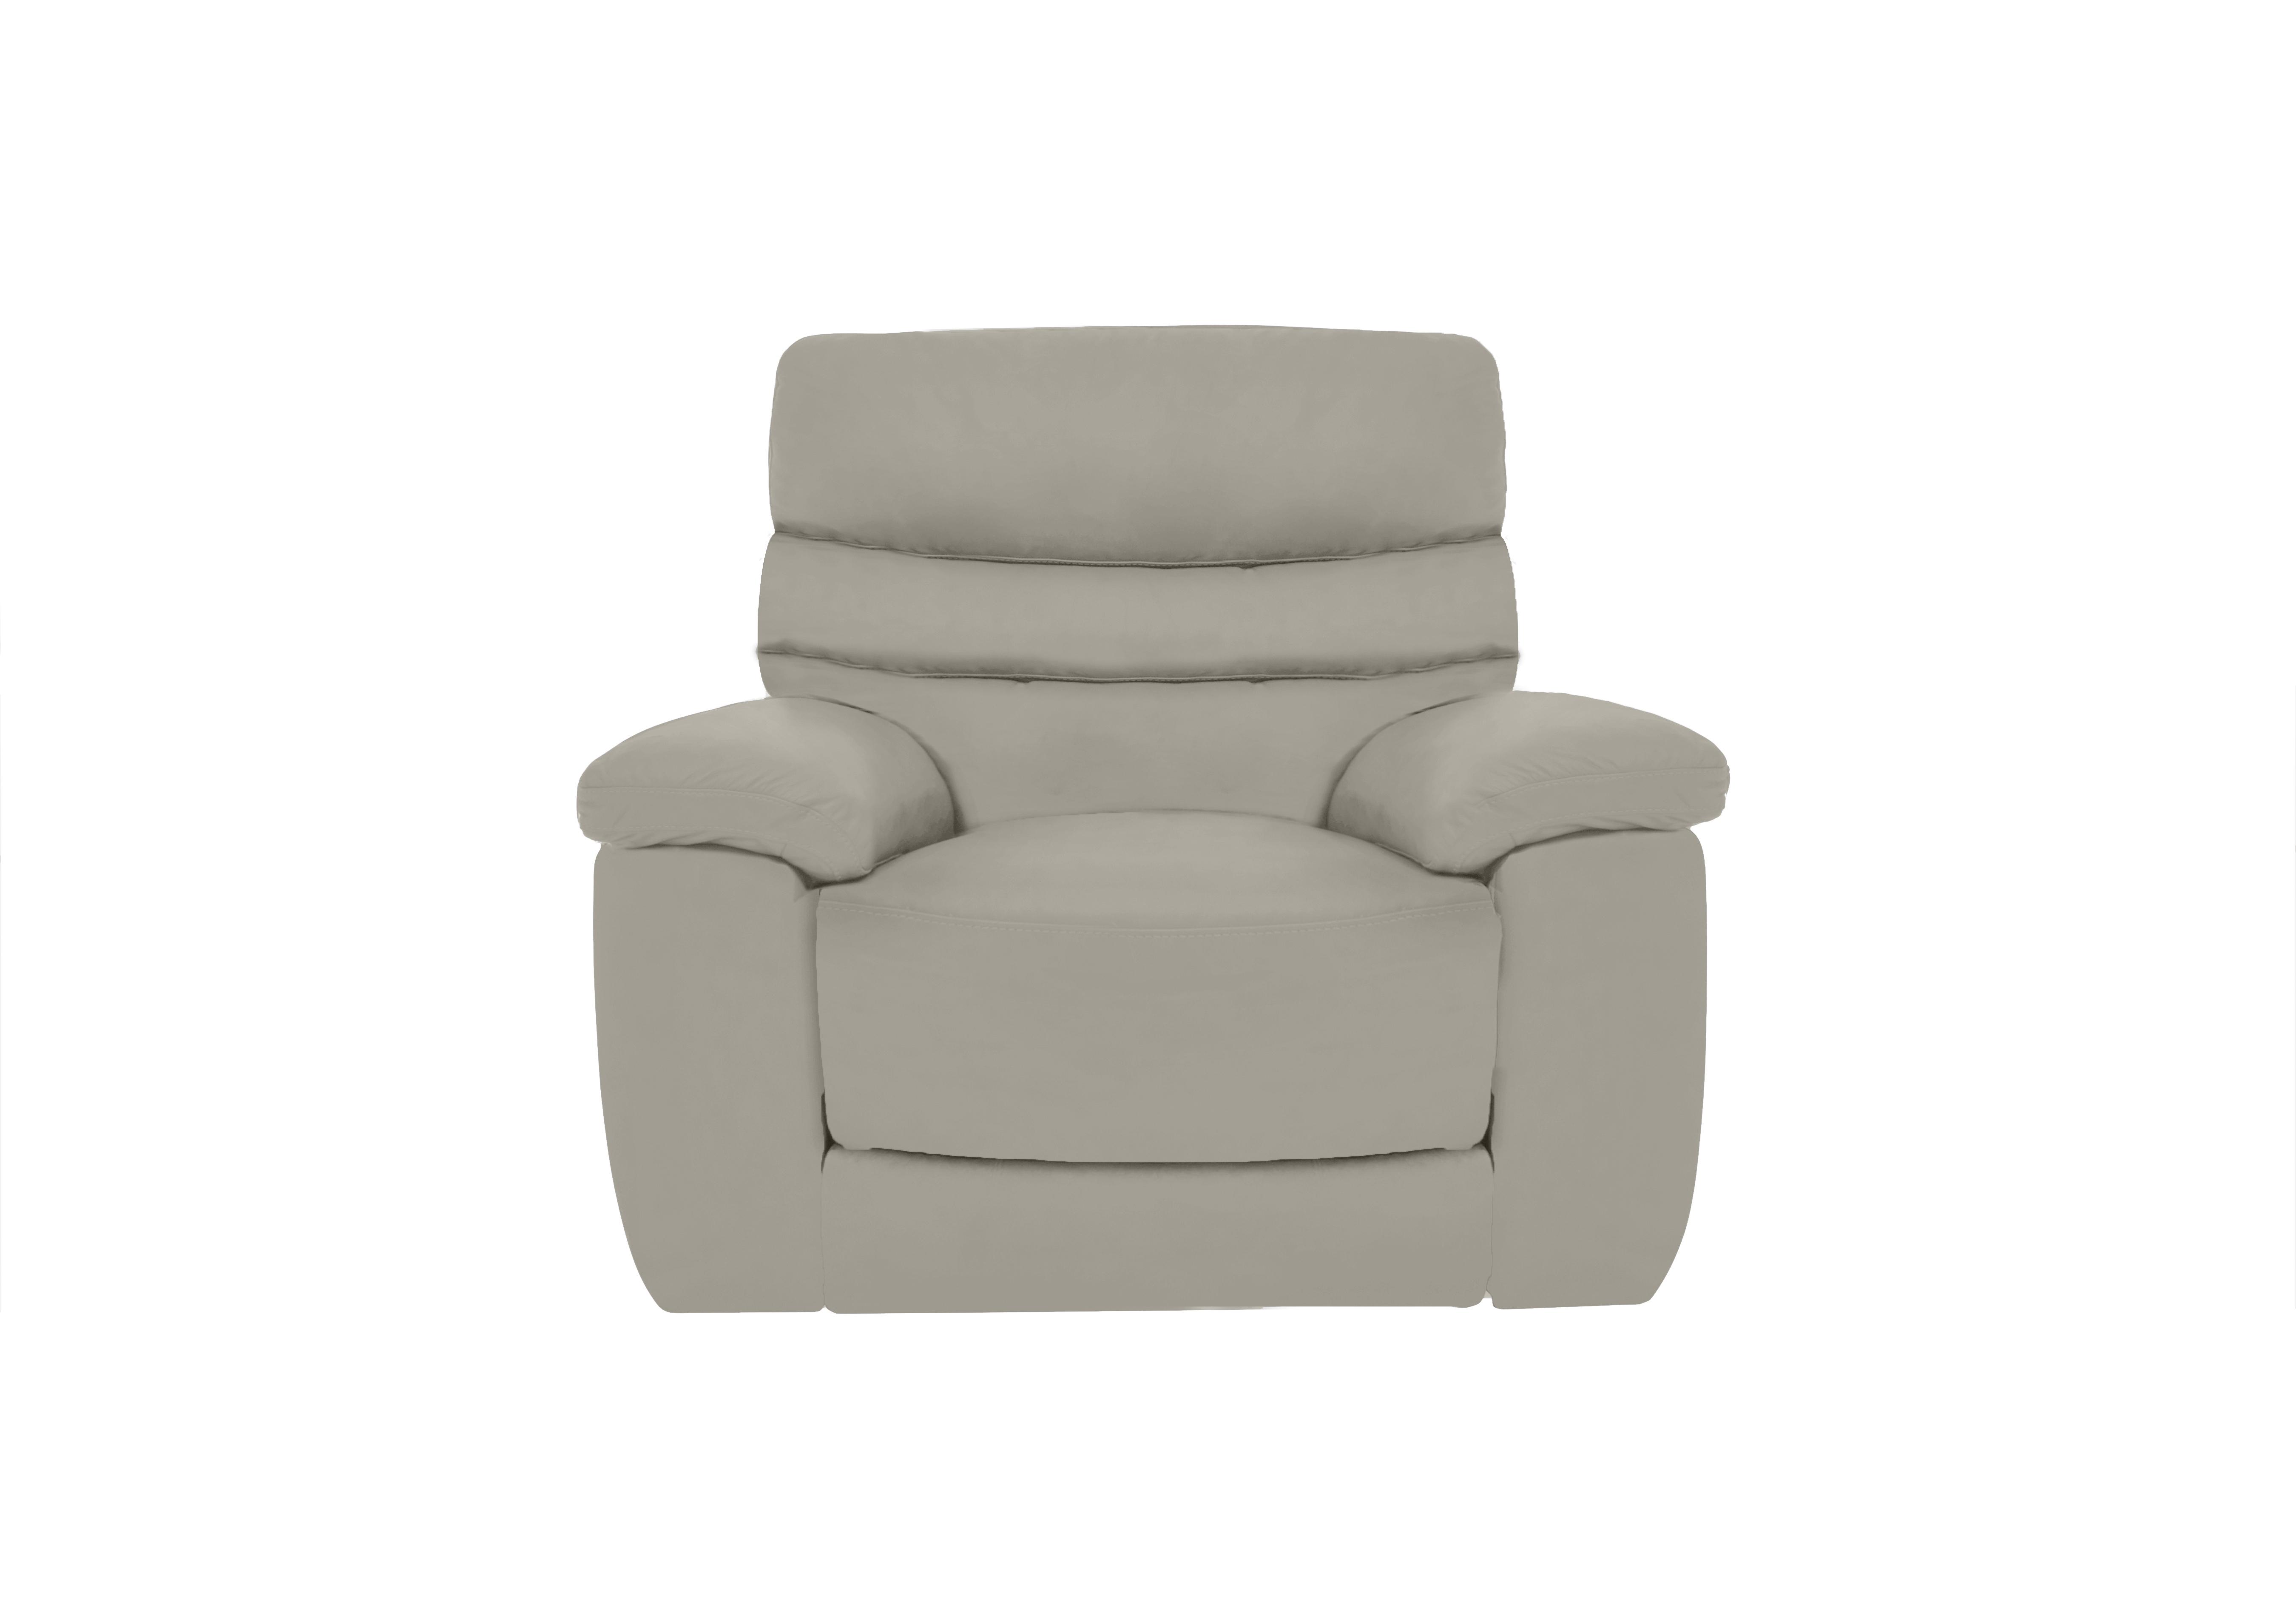 Nimbus Leather Power Recliner Chair with Power Headrest and Power Lumbar in Bx-251e Grey on Furniture Village